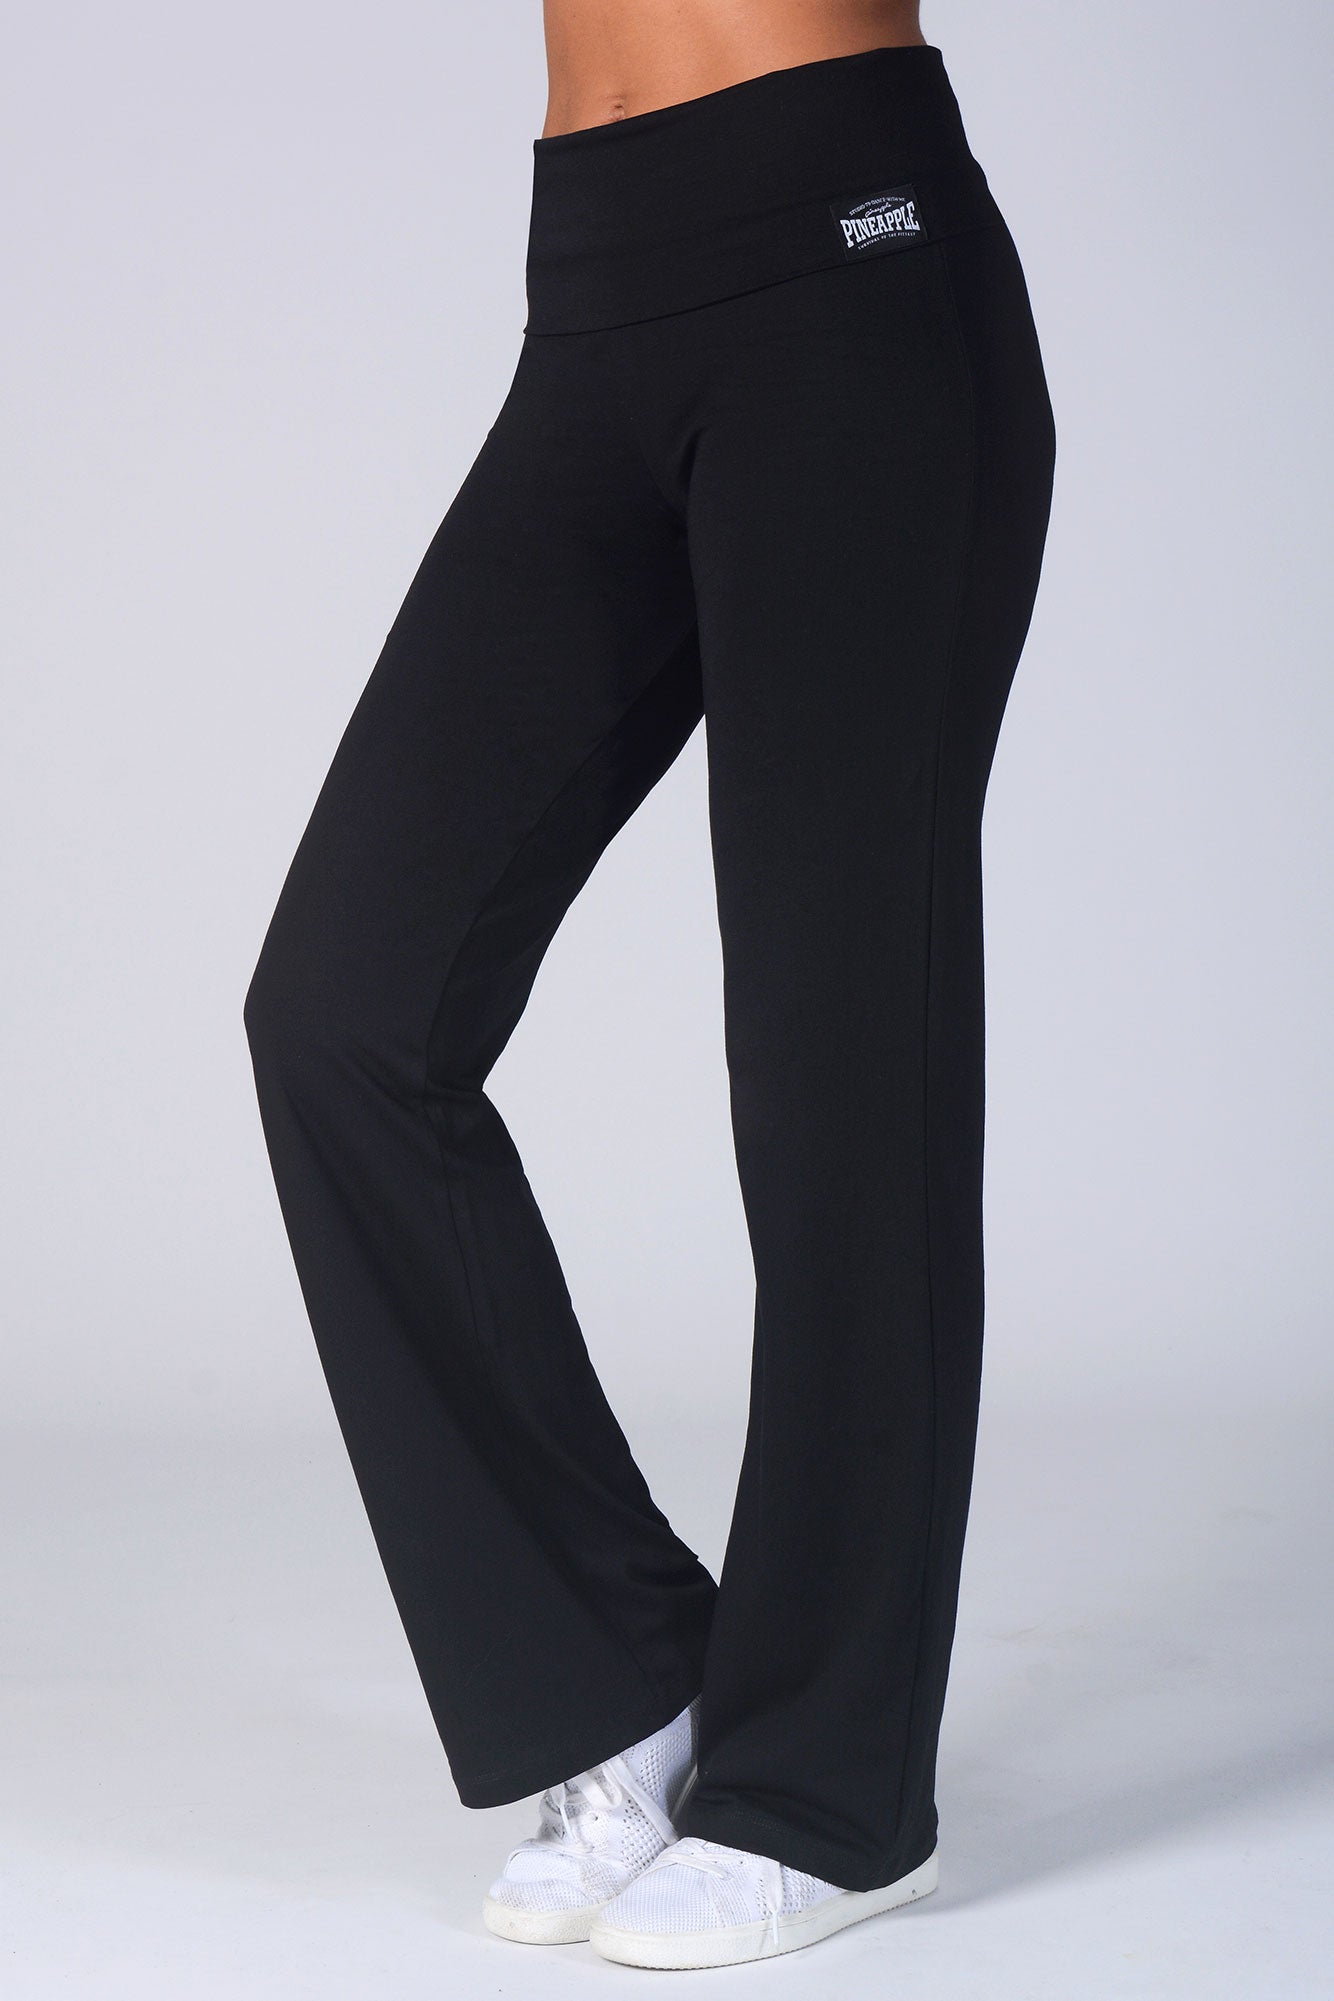 Black Yoga Trousers with Fold Down Waist Band, Pineapple